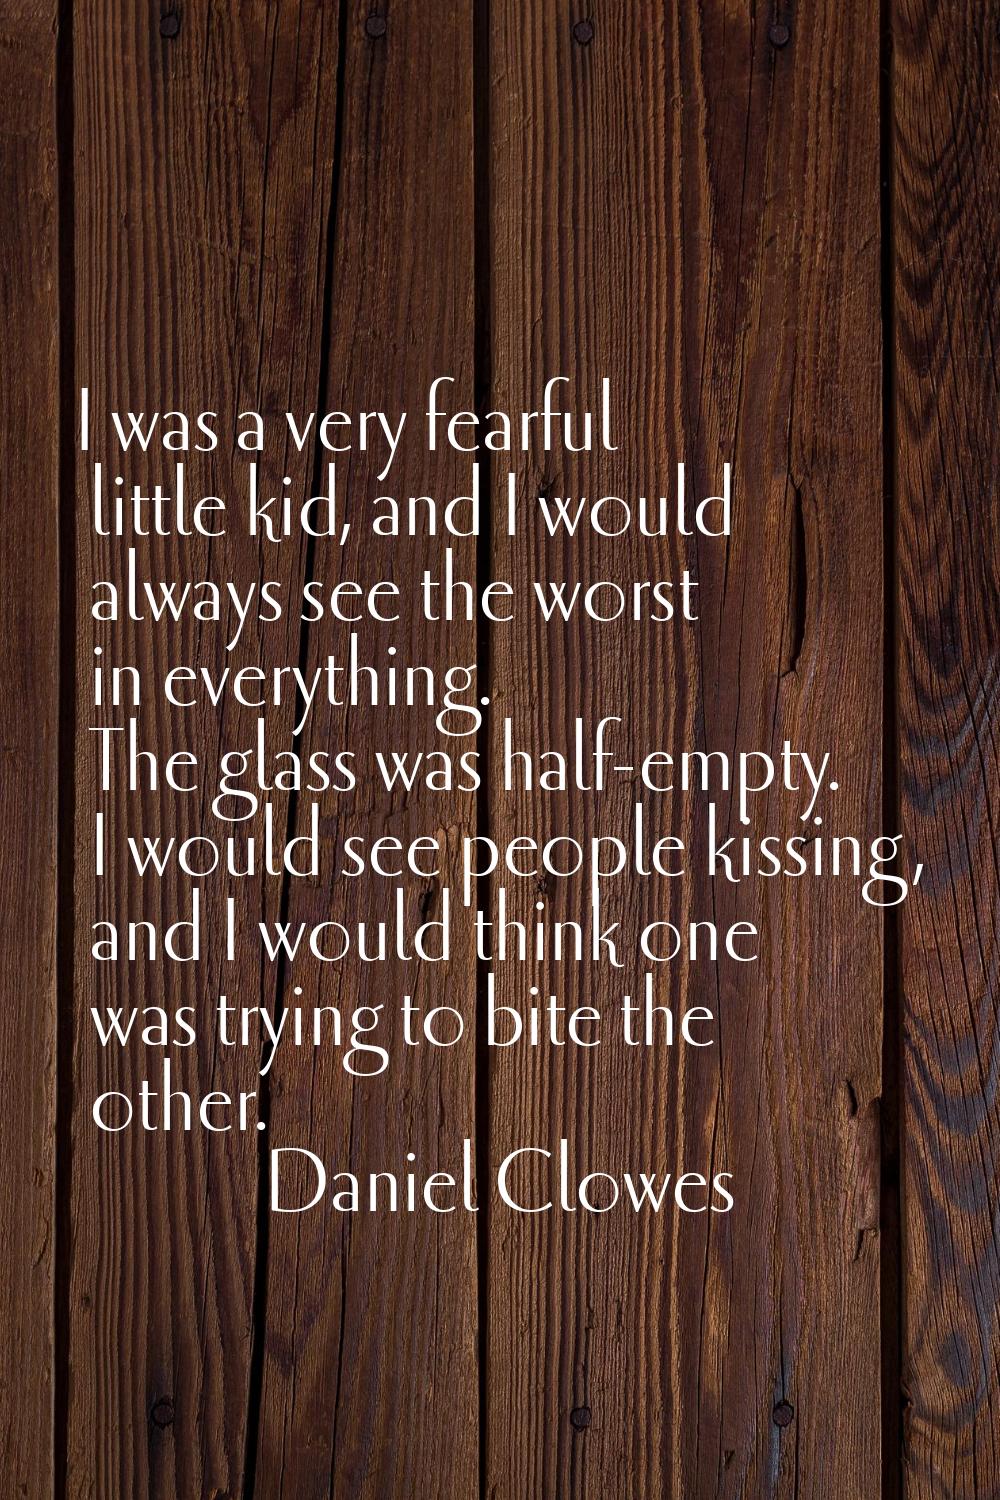 I was a very fearful little kid, and I would always see the worst in everything. The glass was half